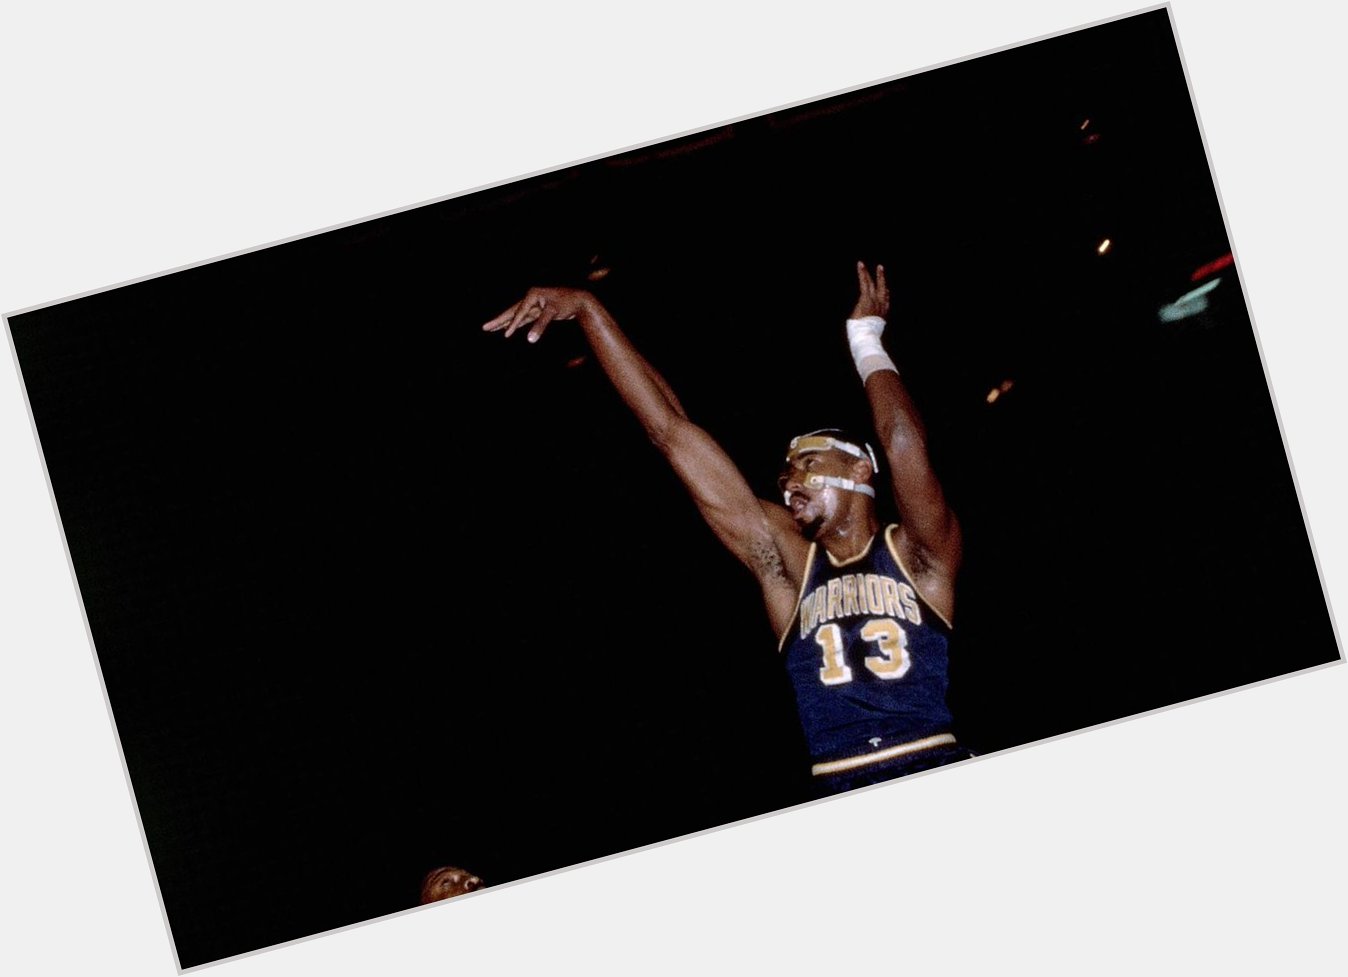 On this date in 1936, a legend was born. Happy Birthday Wilt Chamberlain 